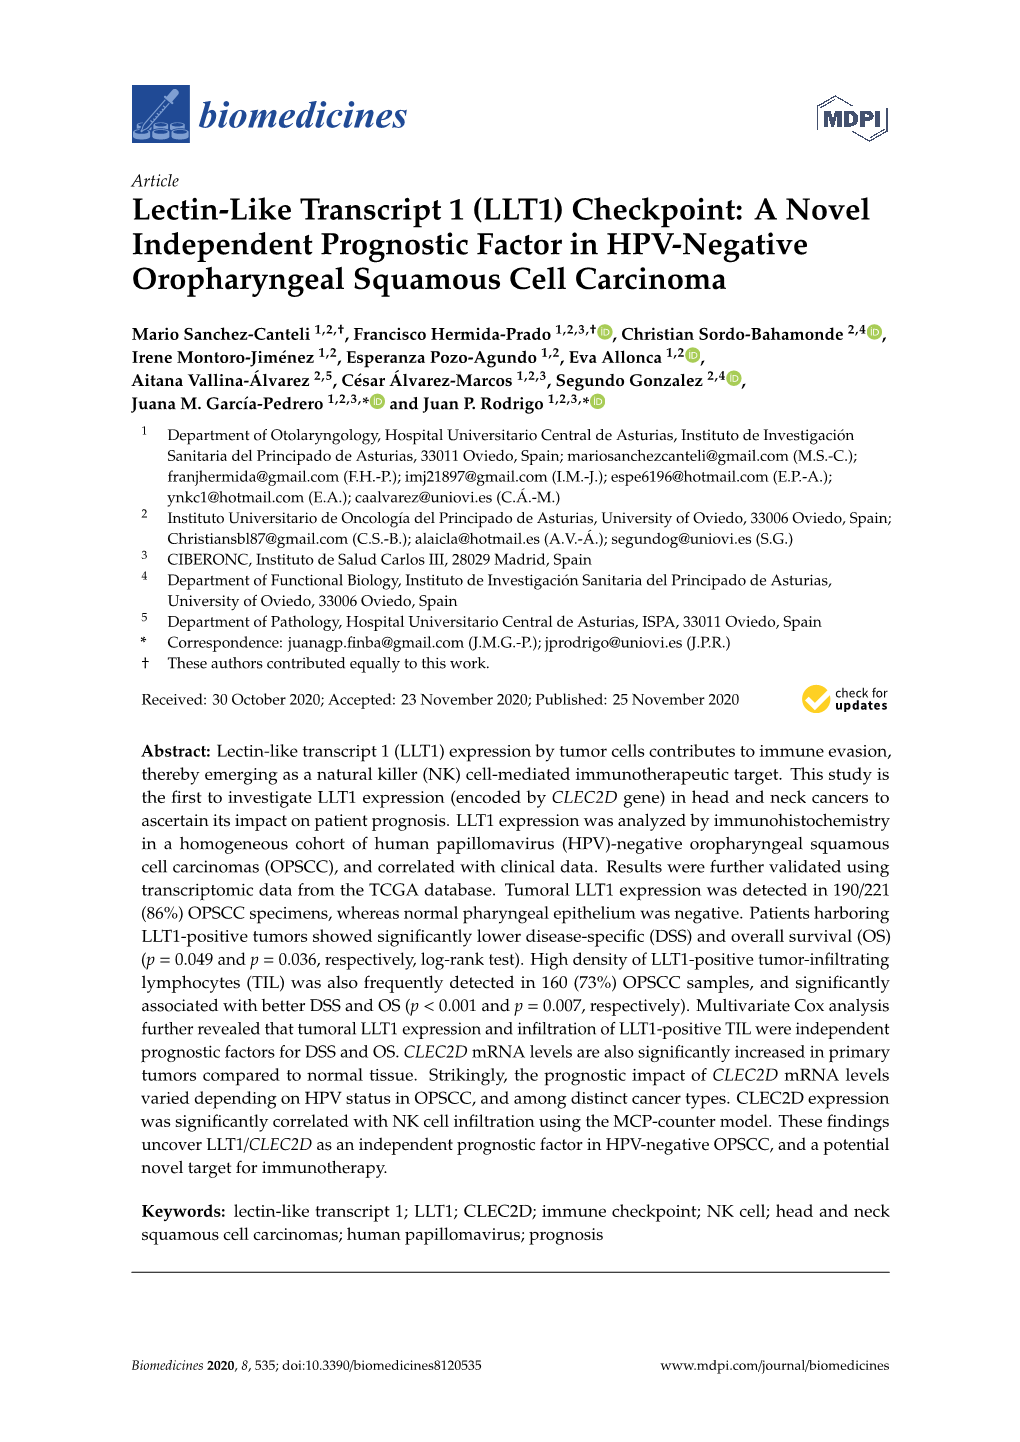 LLT1) Checkpoint: a Novel Independent Prognostic Factor in HPV-Negative Oropharyngeal Squamous Cell Carcinoma